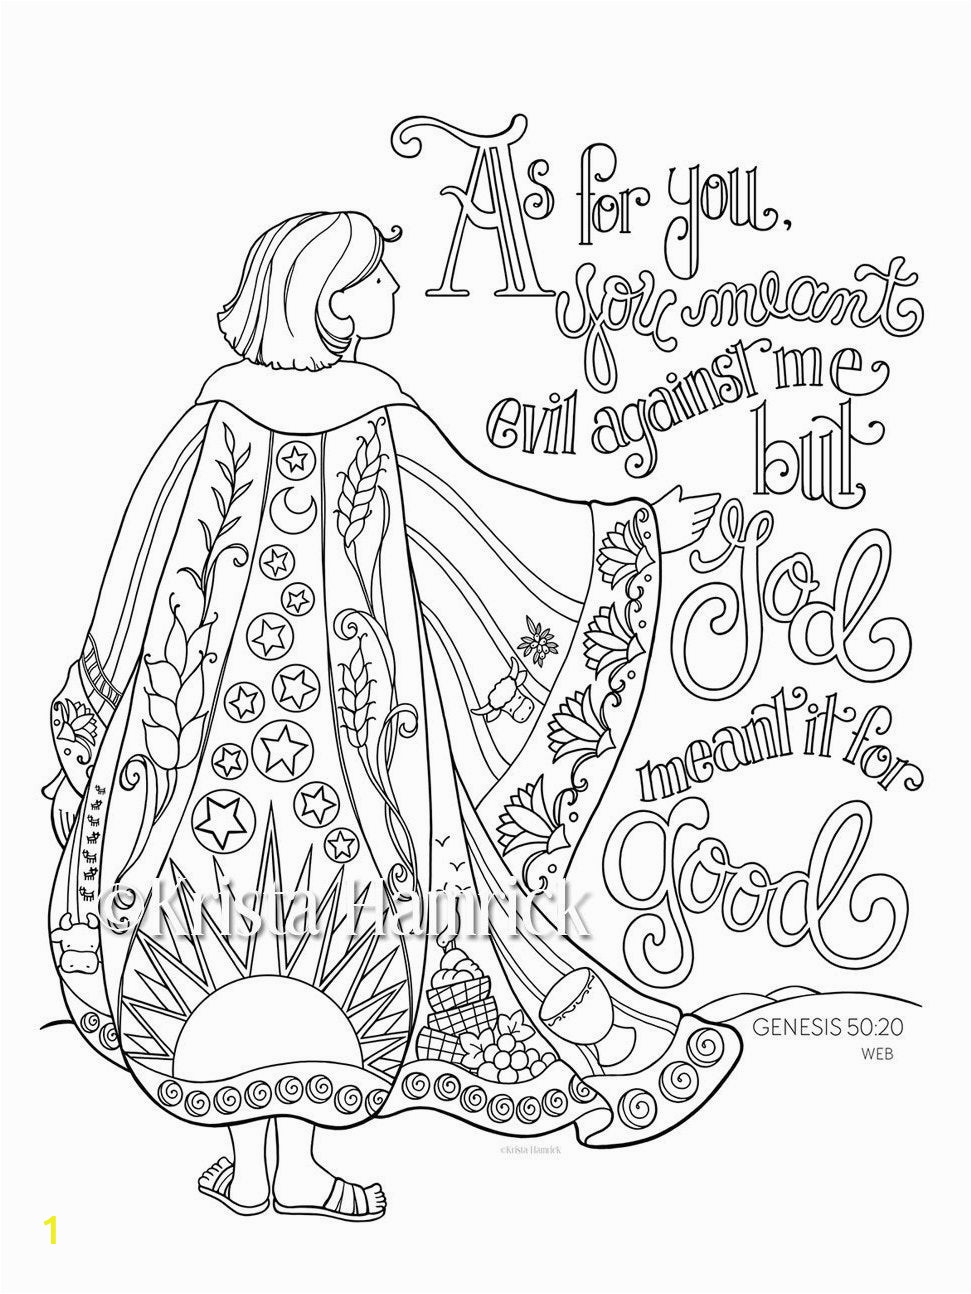 Coloring Page Of Joseph and His Coat Of Many Colors Joseph S Coat Of Many Colors Coloring Page 8 5×11 Bible